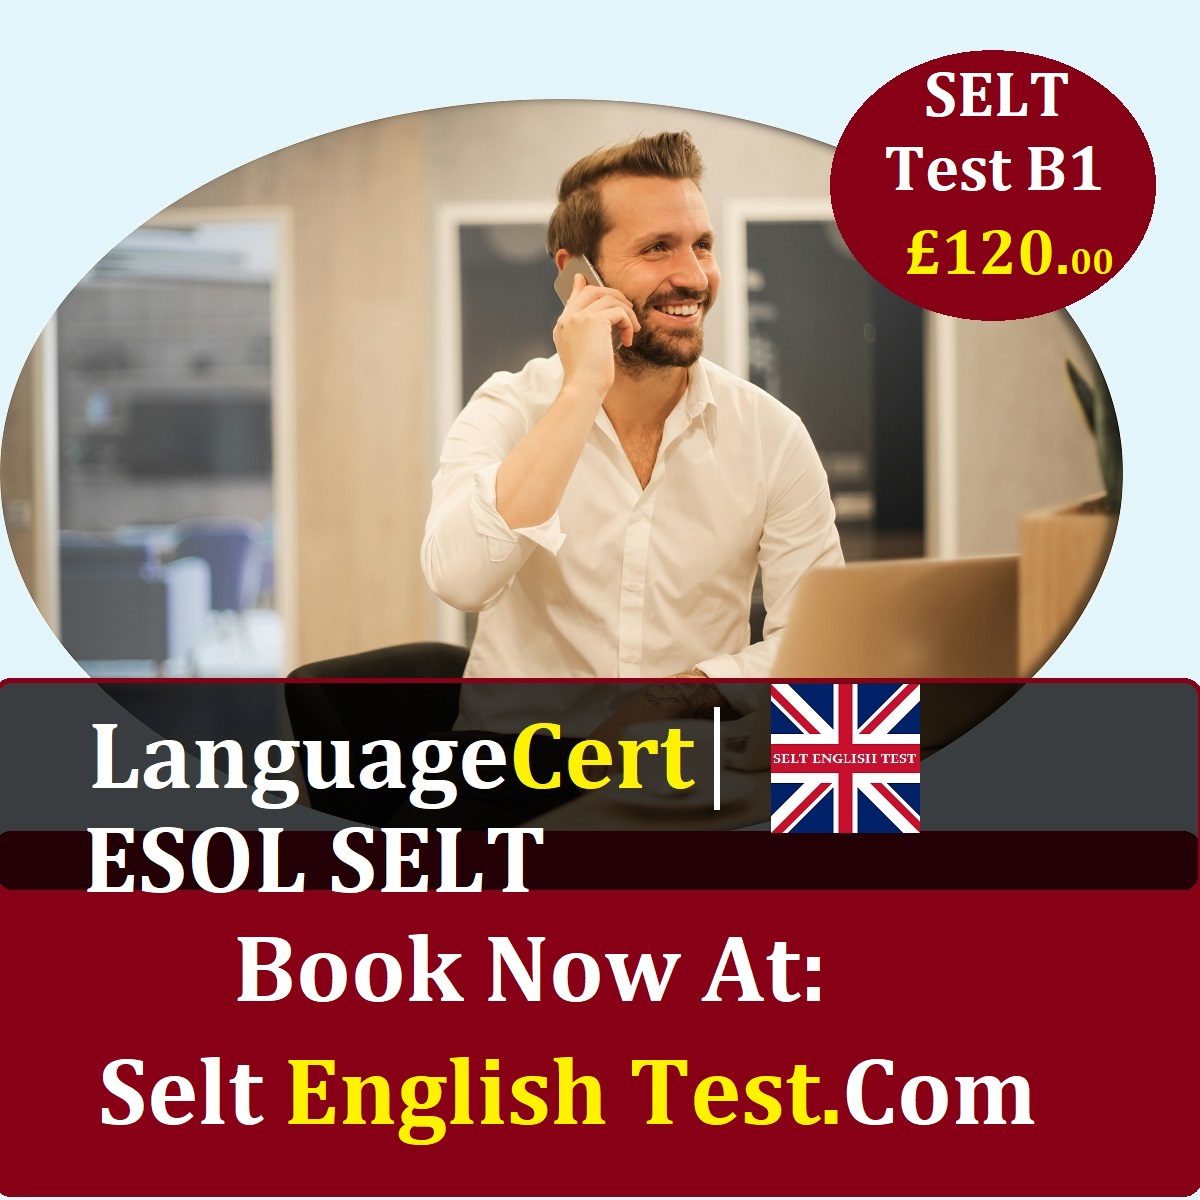 Selt English Test Booking Assistance